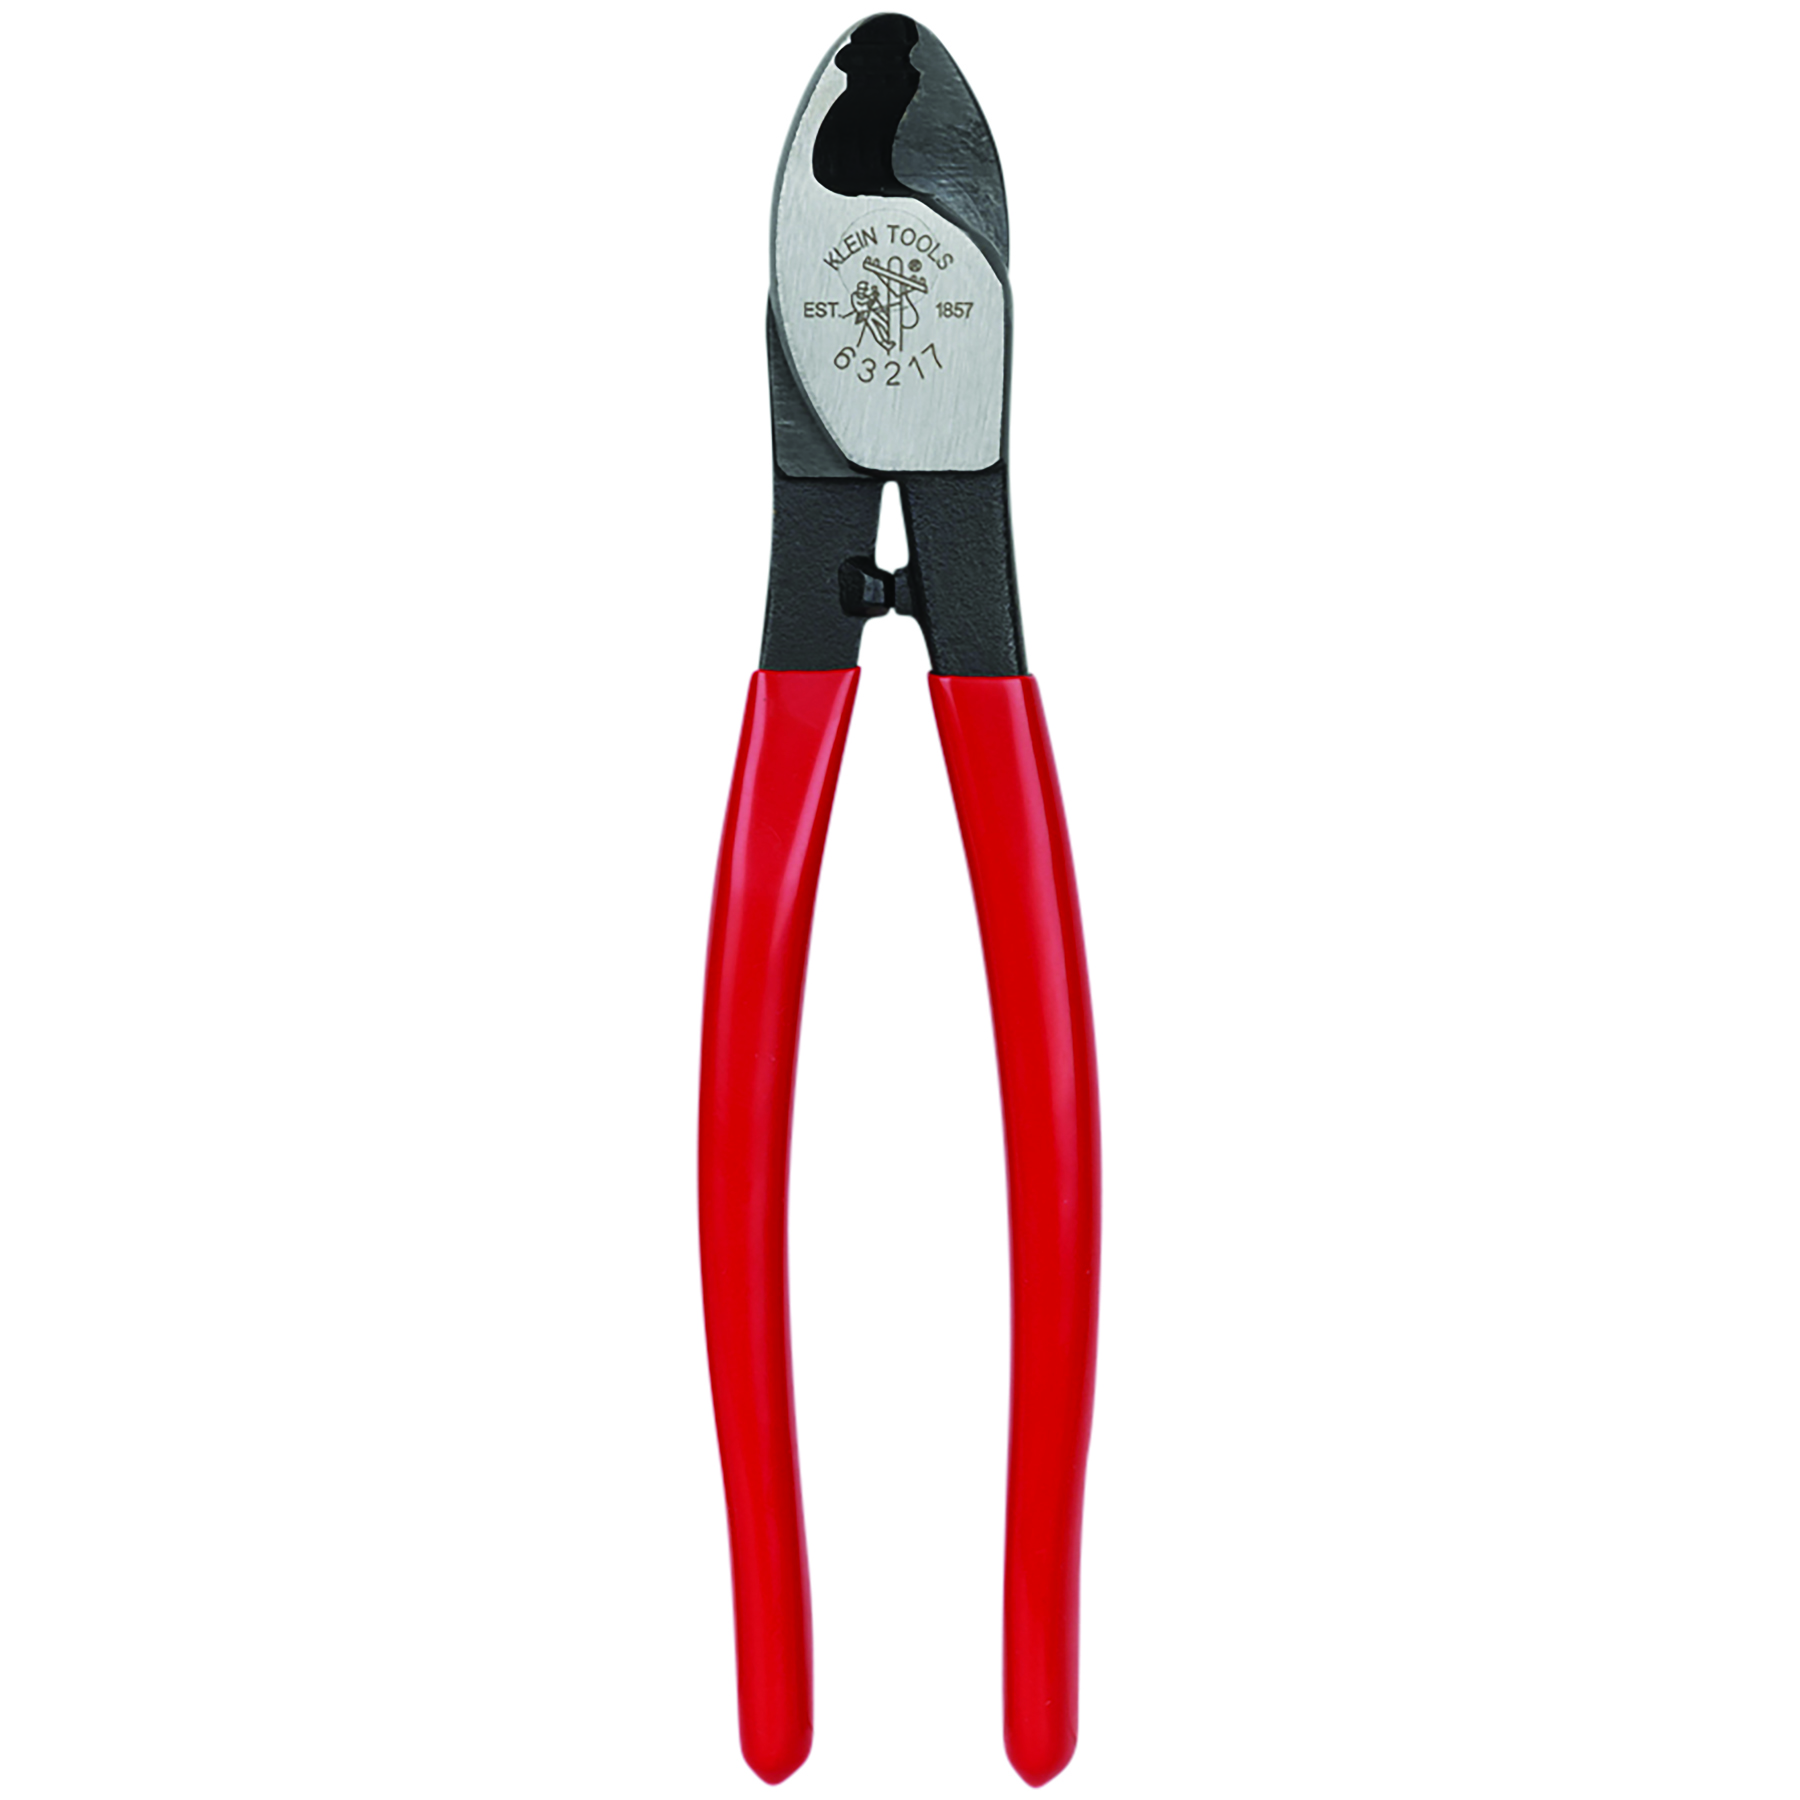 210MM CABLE CUTTER